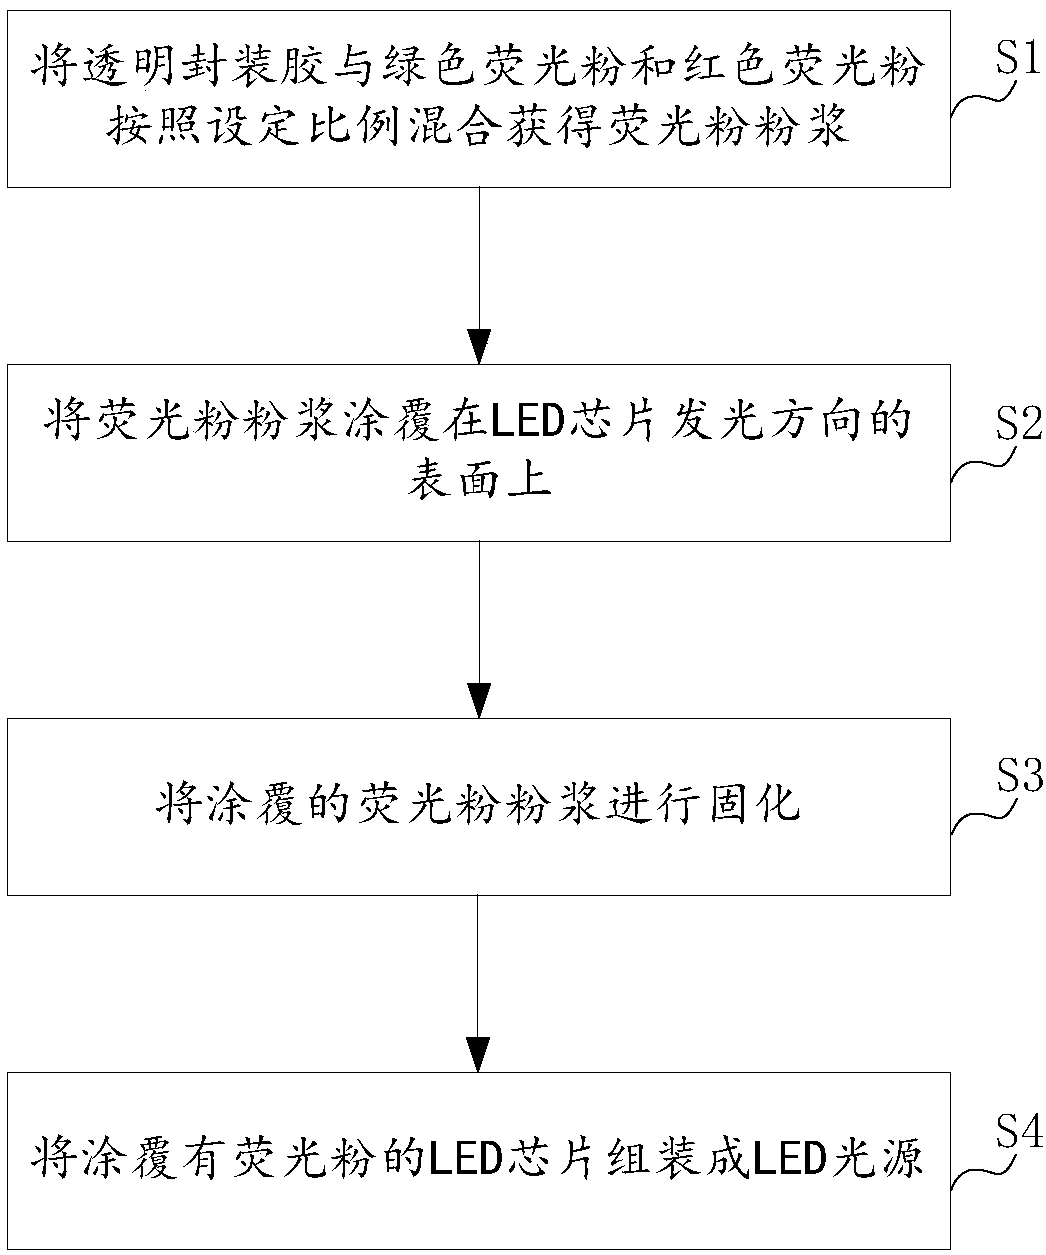 Generation method of LED ecological light source capable of satisfying plant growth and human eye requirement simultaneously